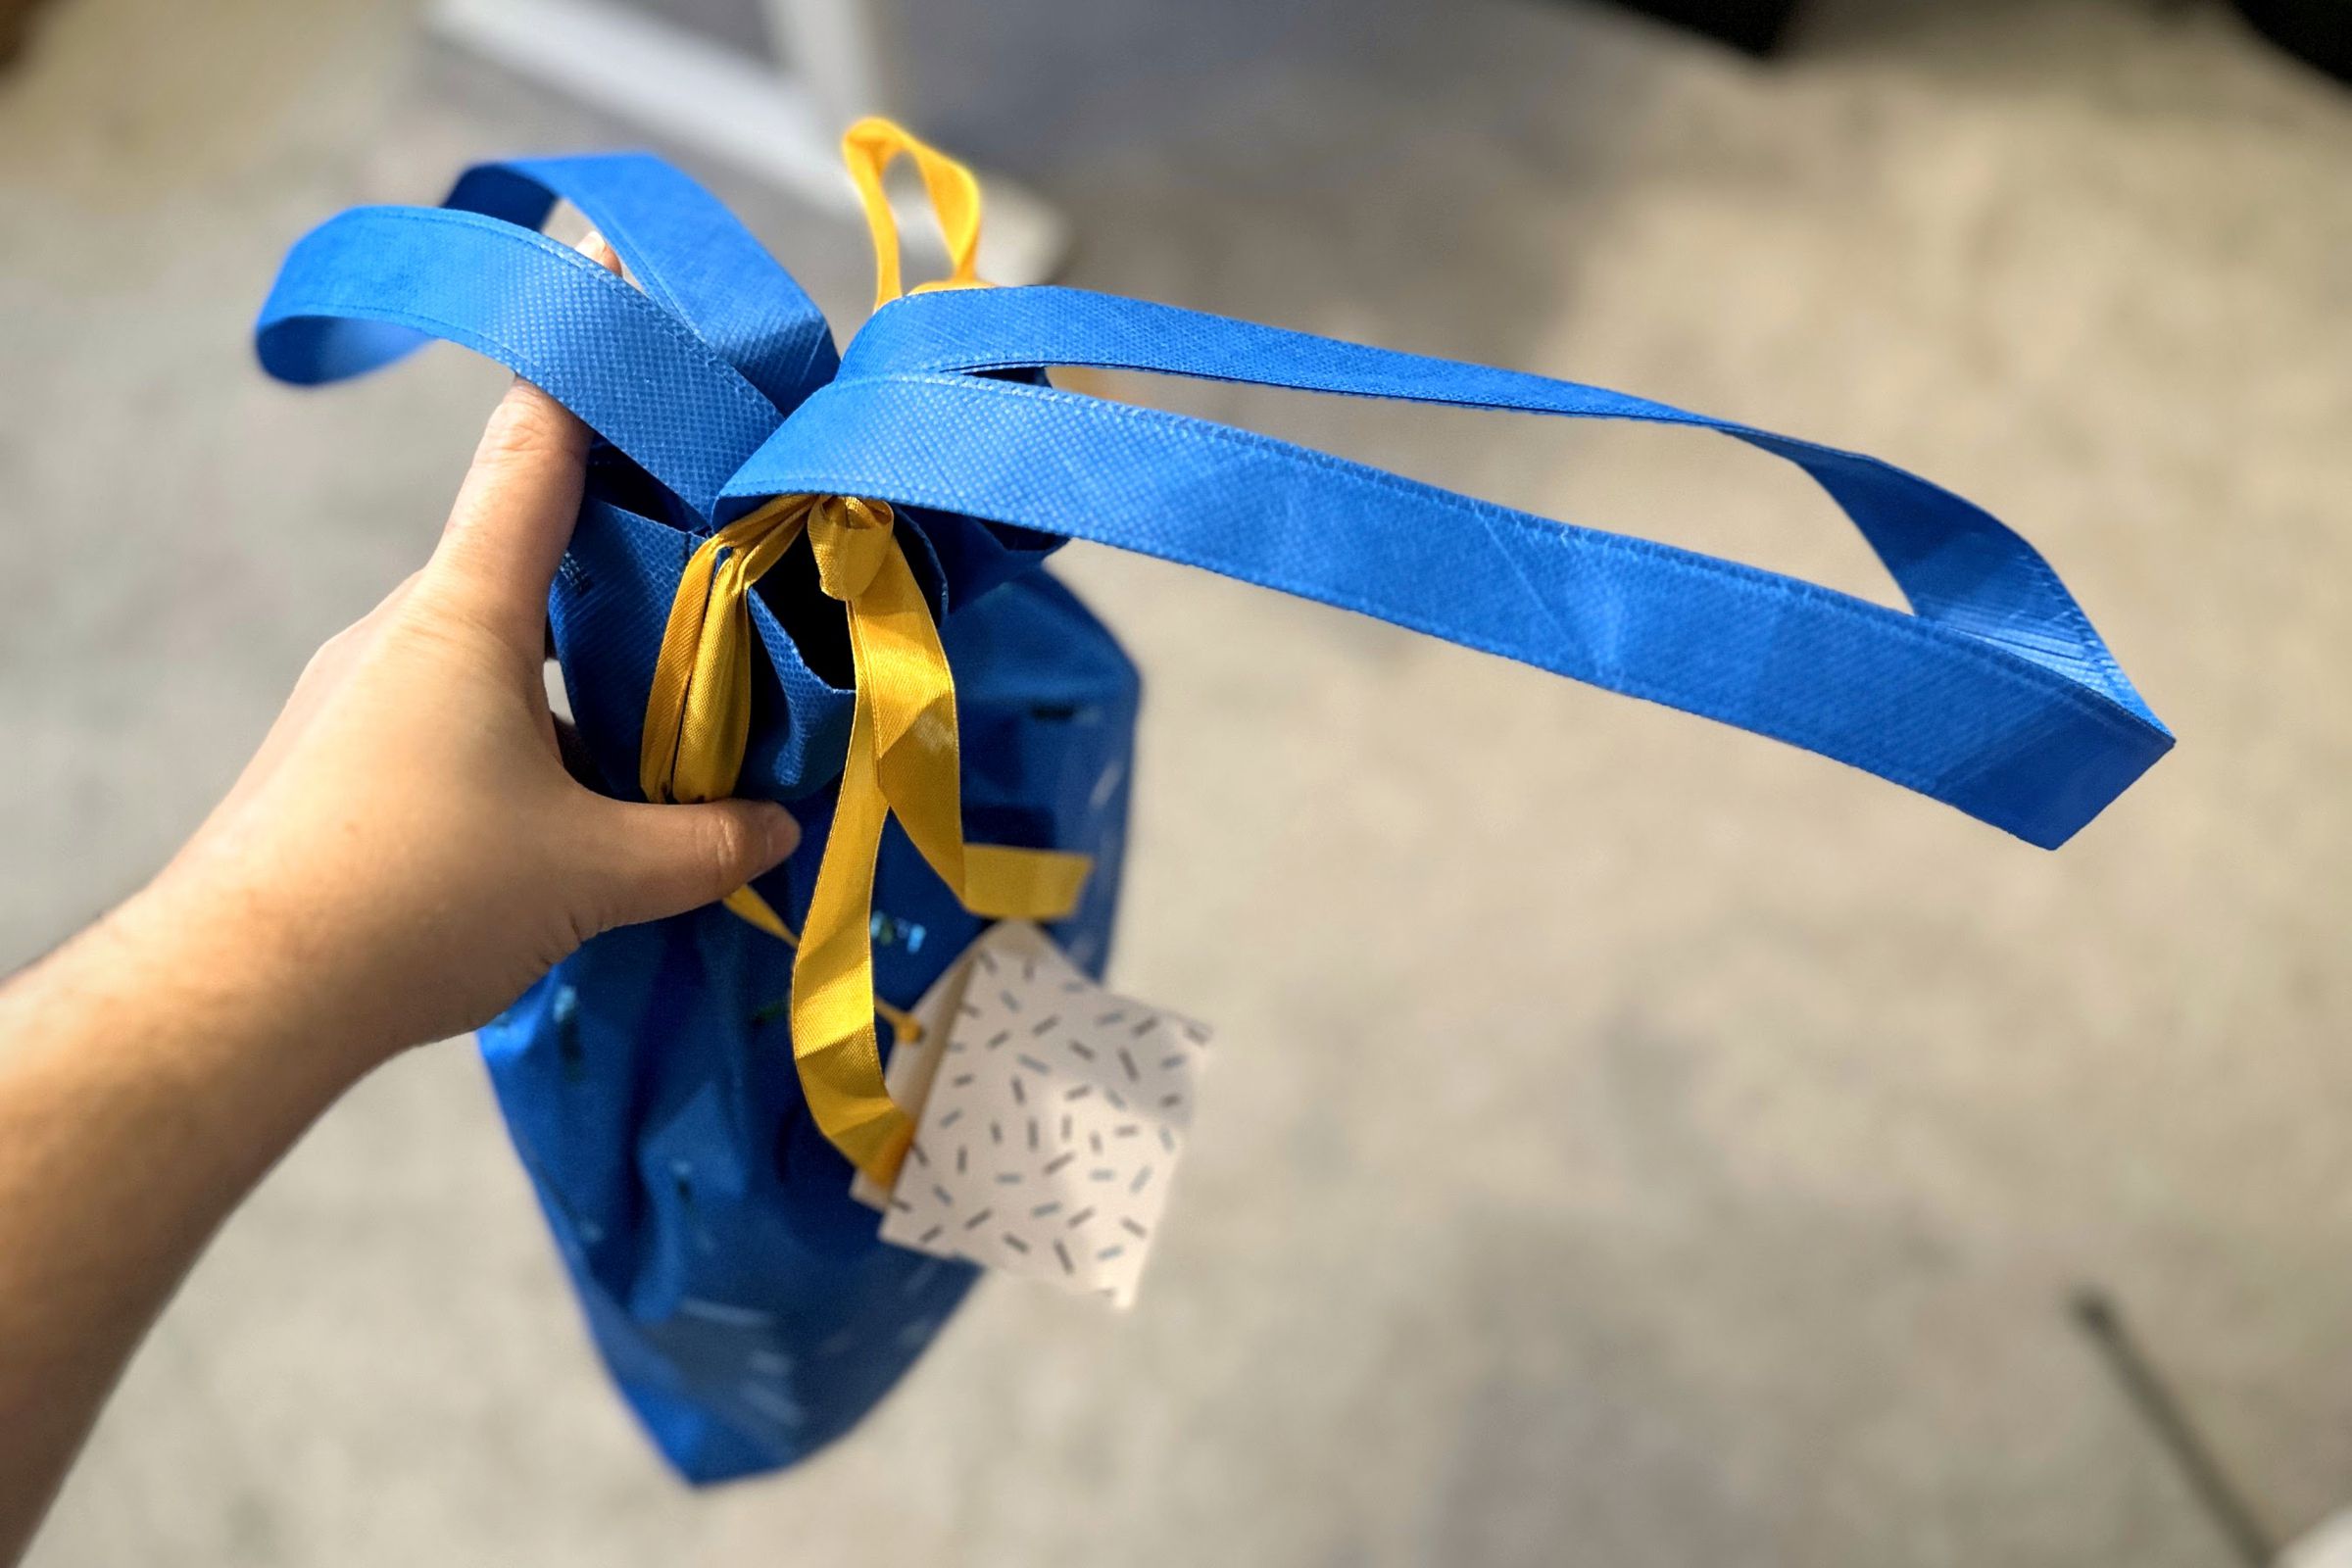 This blue medium-size Amazon bag has handles just like a reusable grocery store bag.